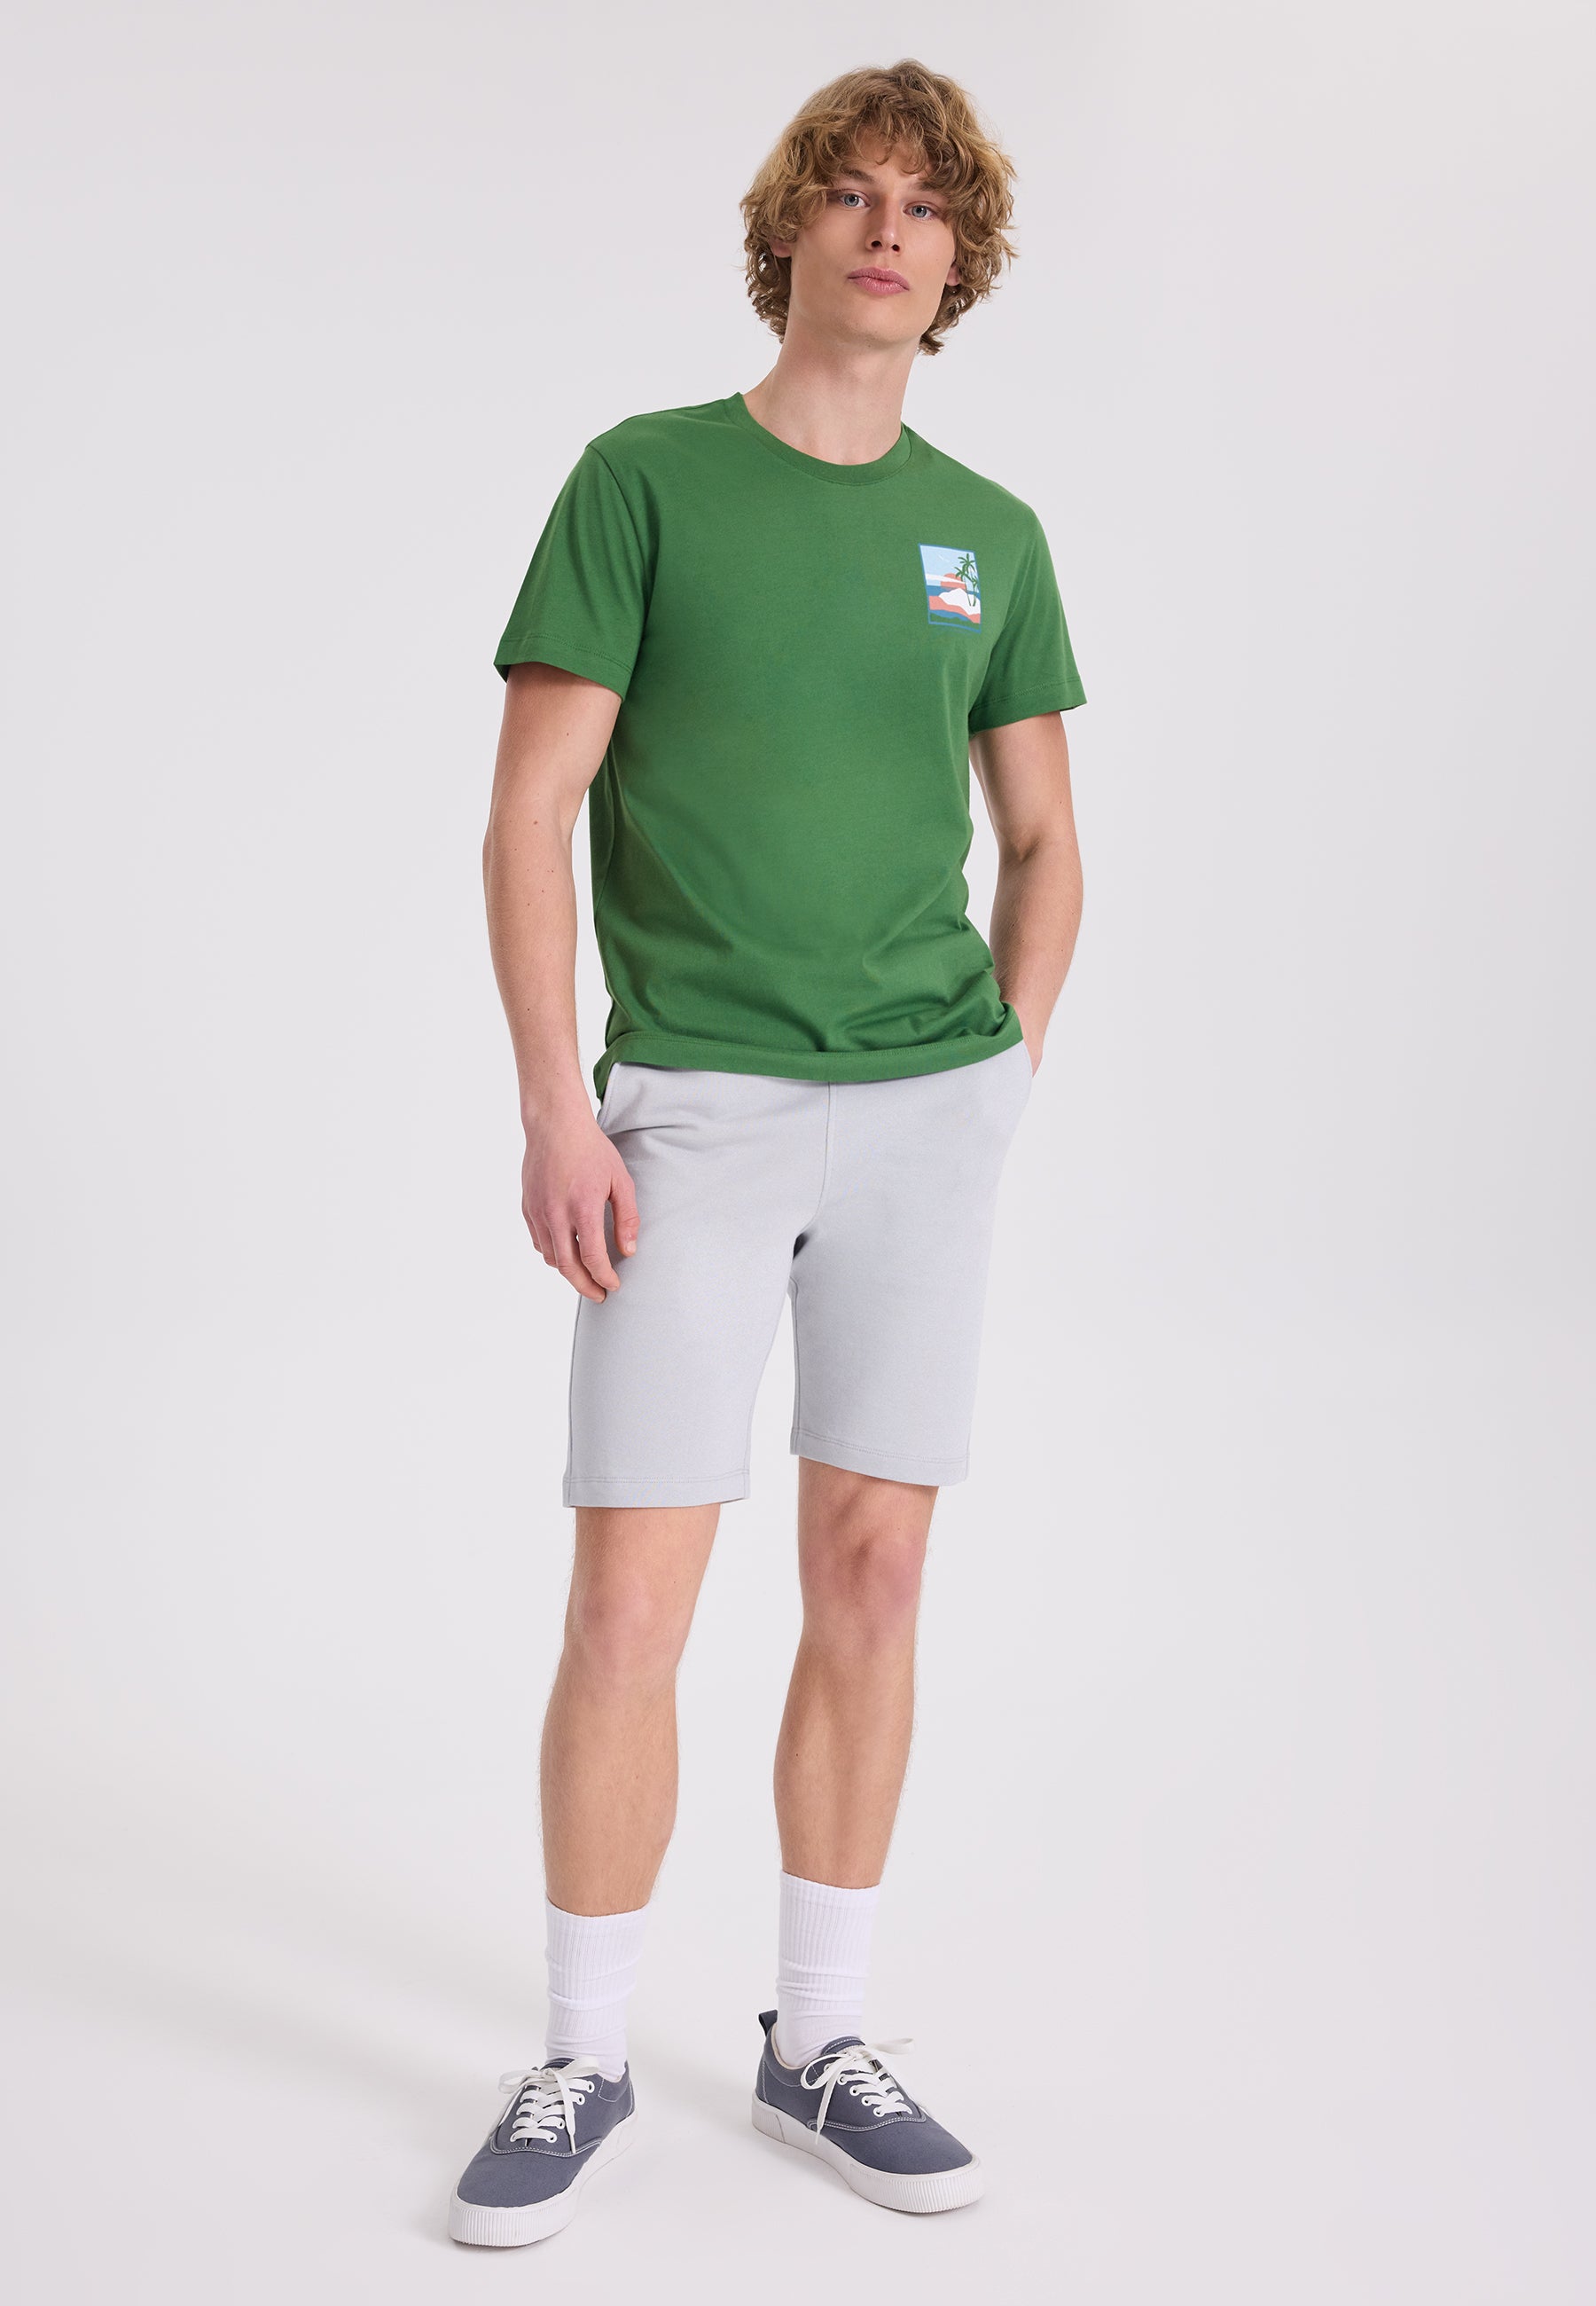 WMBACK SUNSET TEE in Piquant Green